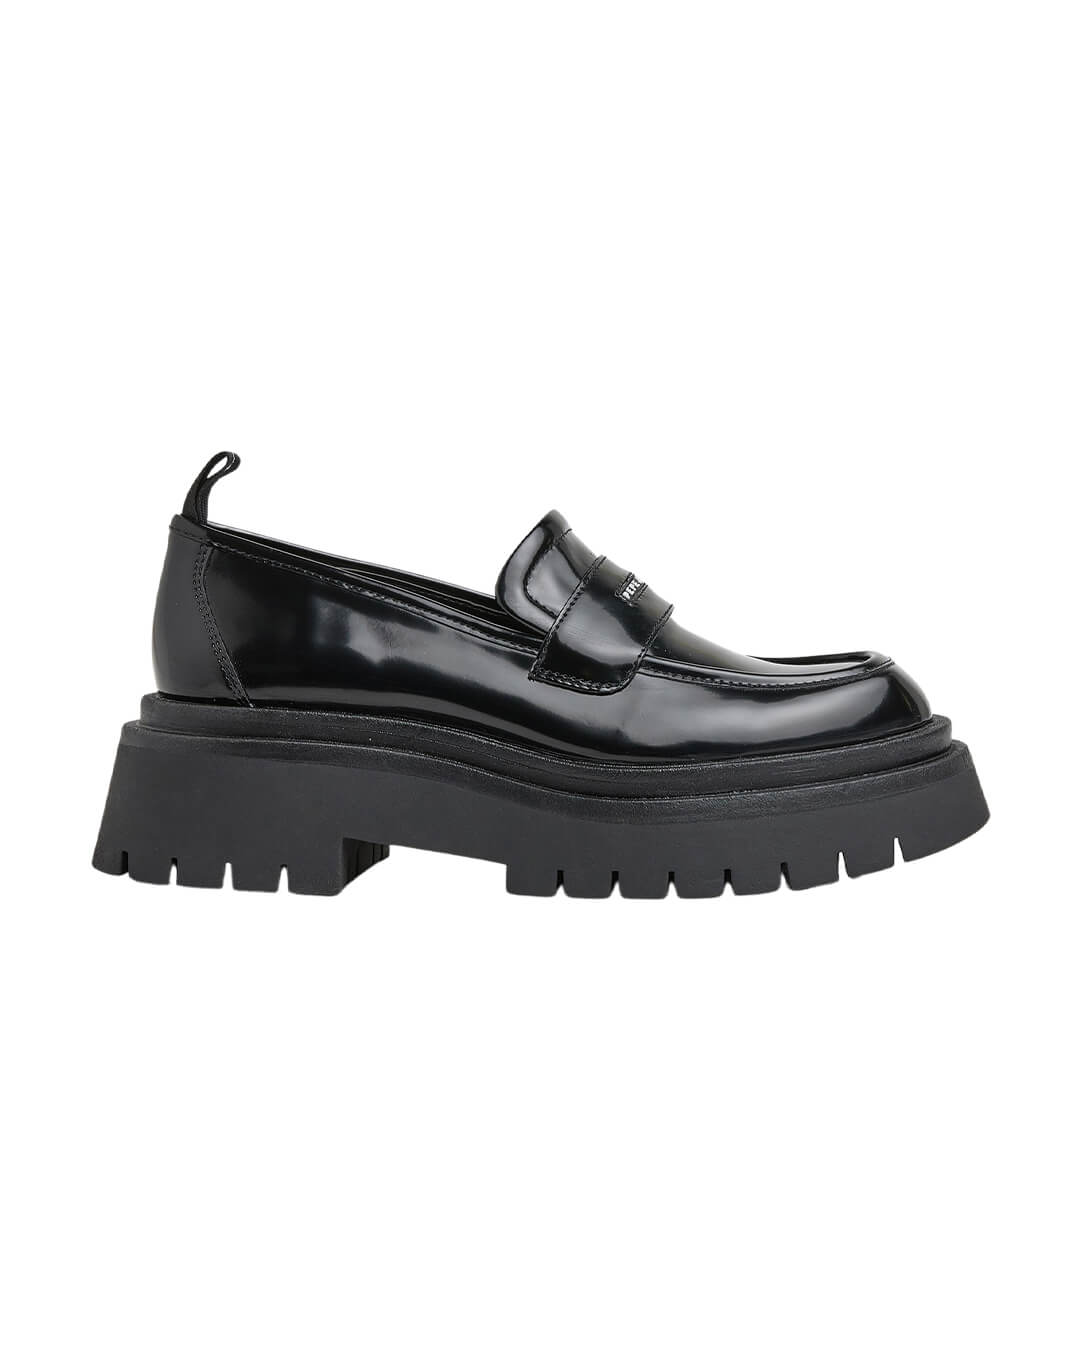 Pepe Jeans Shoes Pepe Jeans Queen Black Oxford Loafers